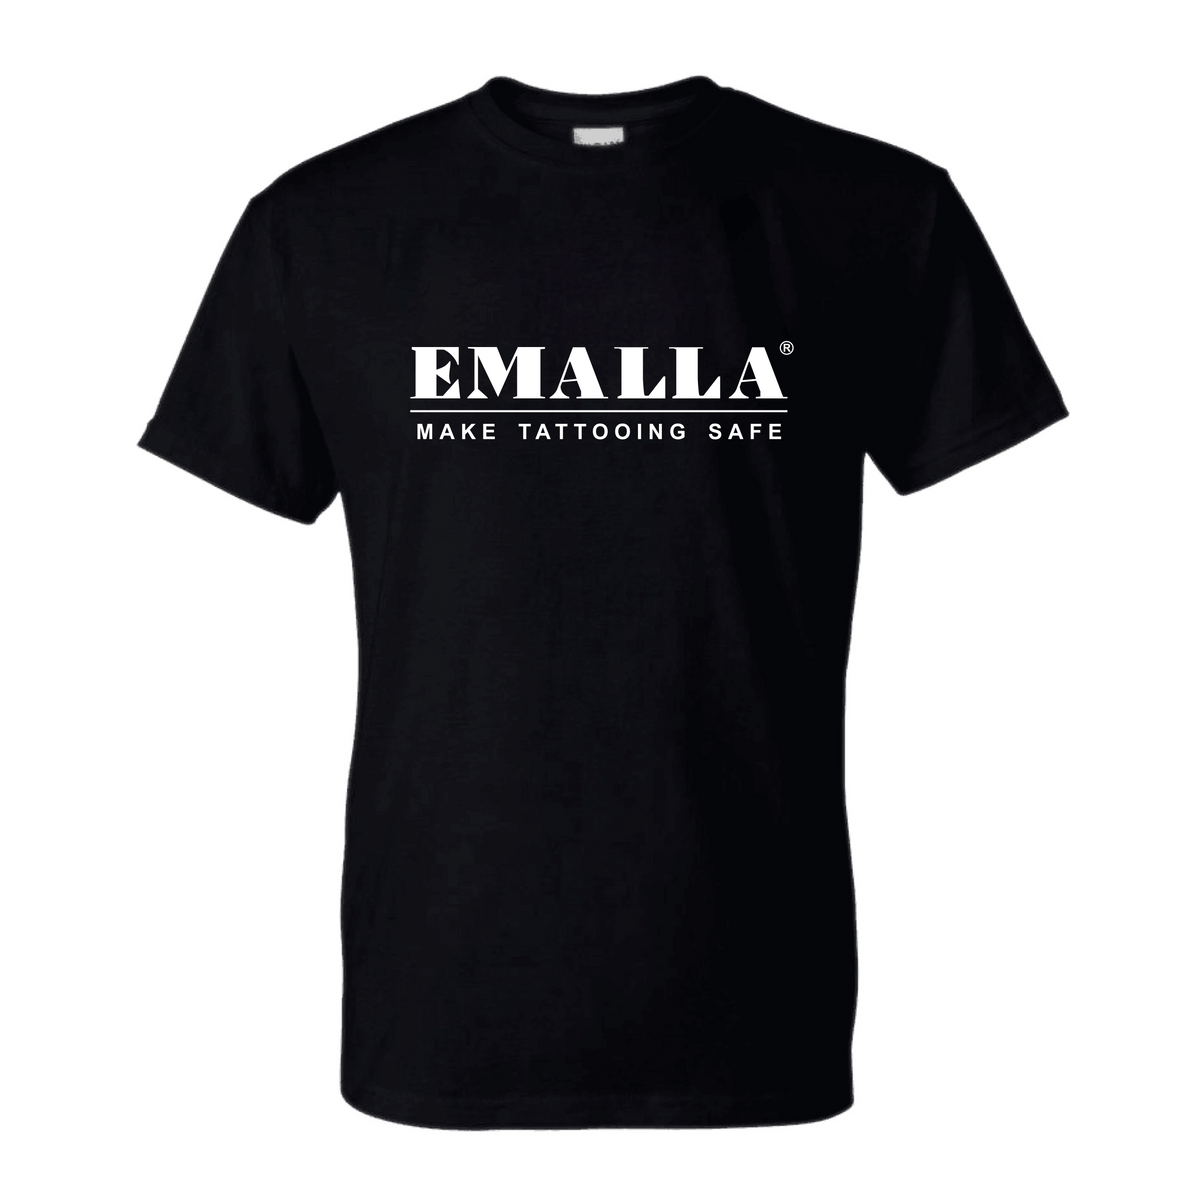 Black T-Shirt with white "EMALLA" print on the front is on sale on Emalla Official Website